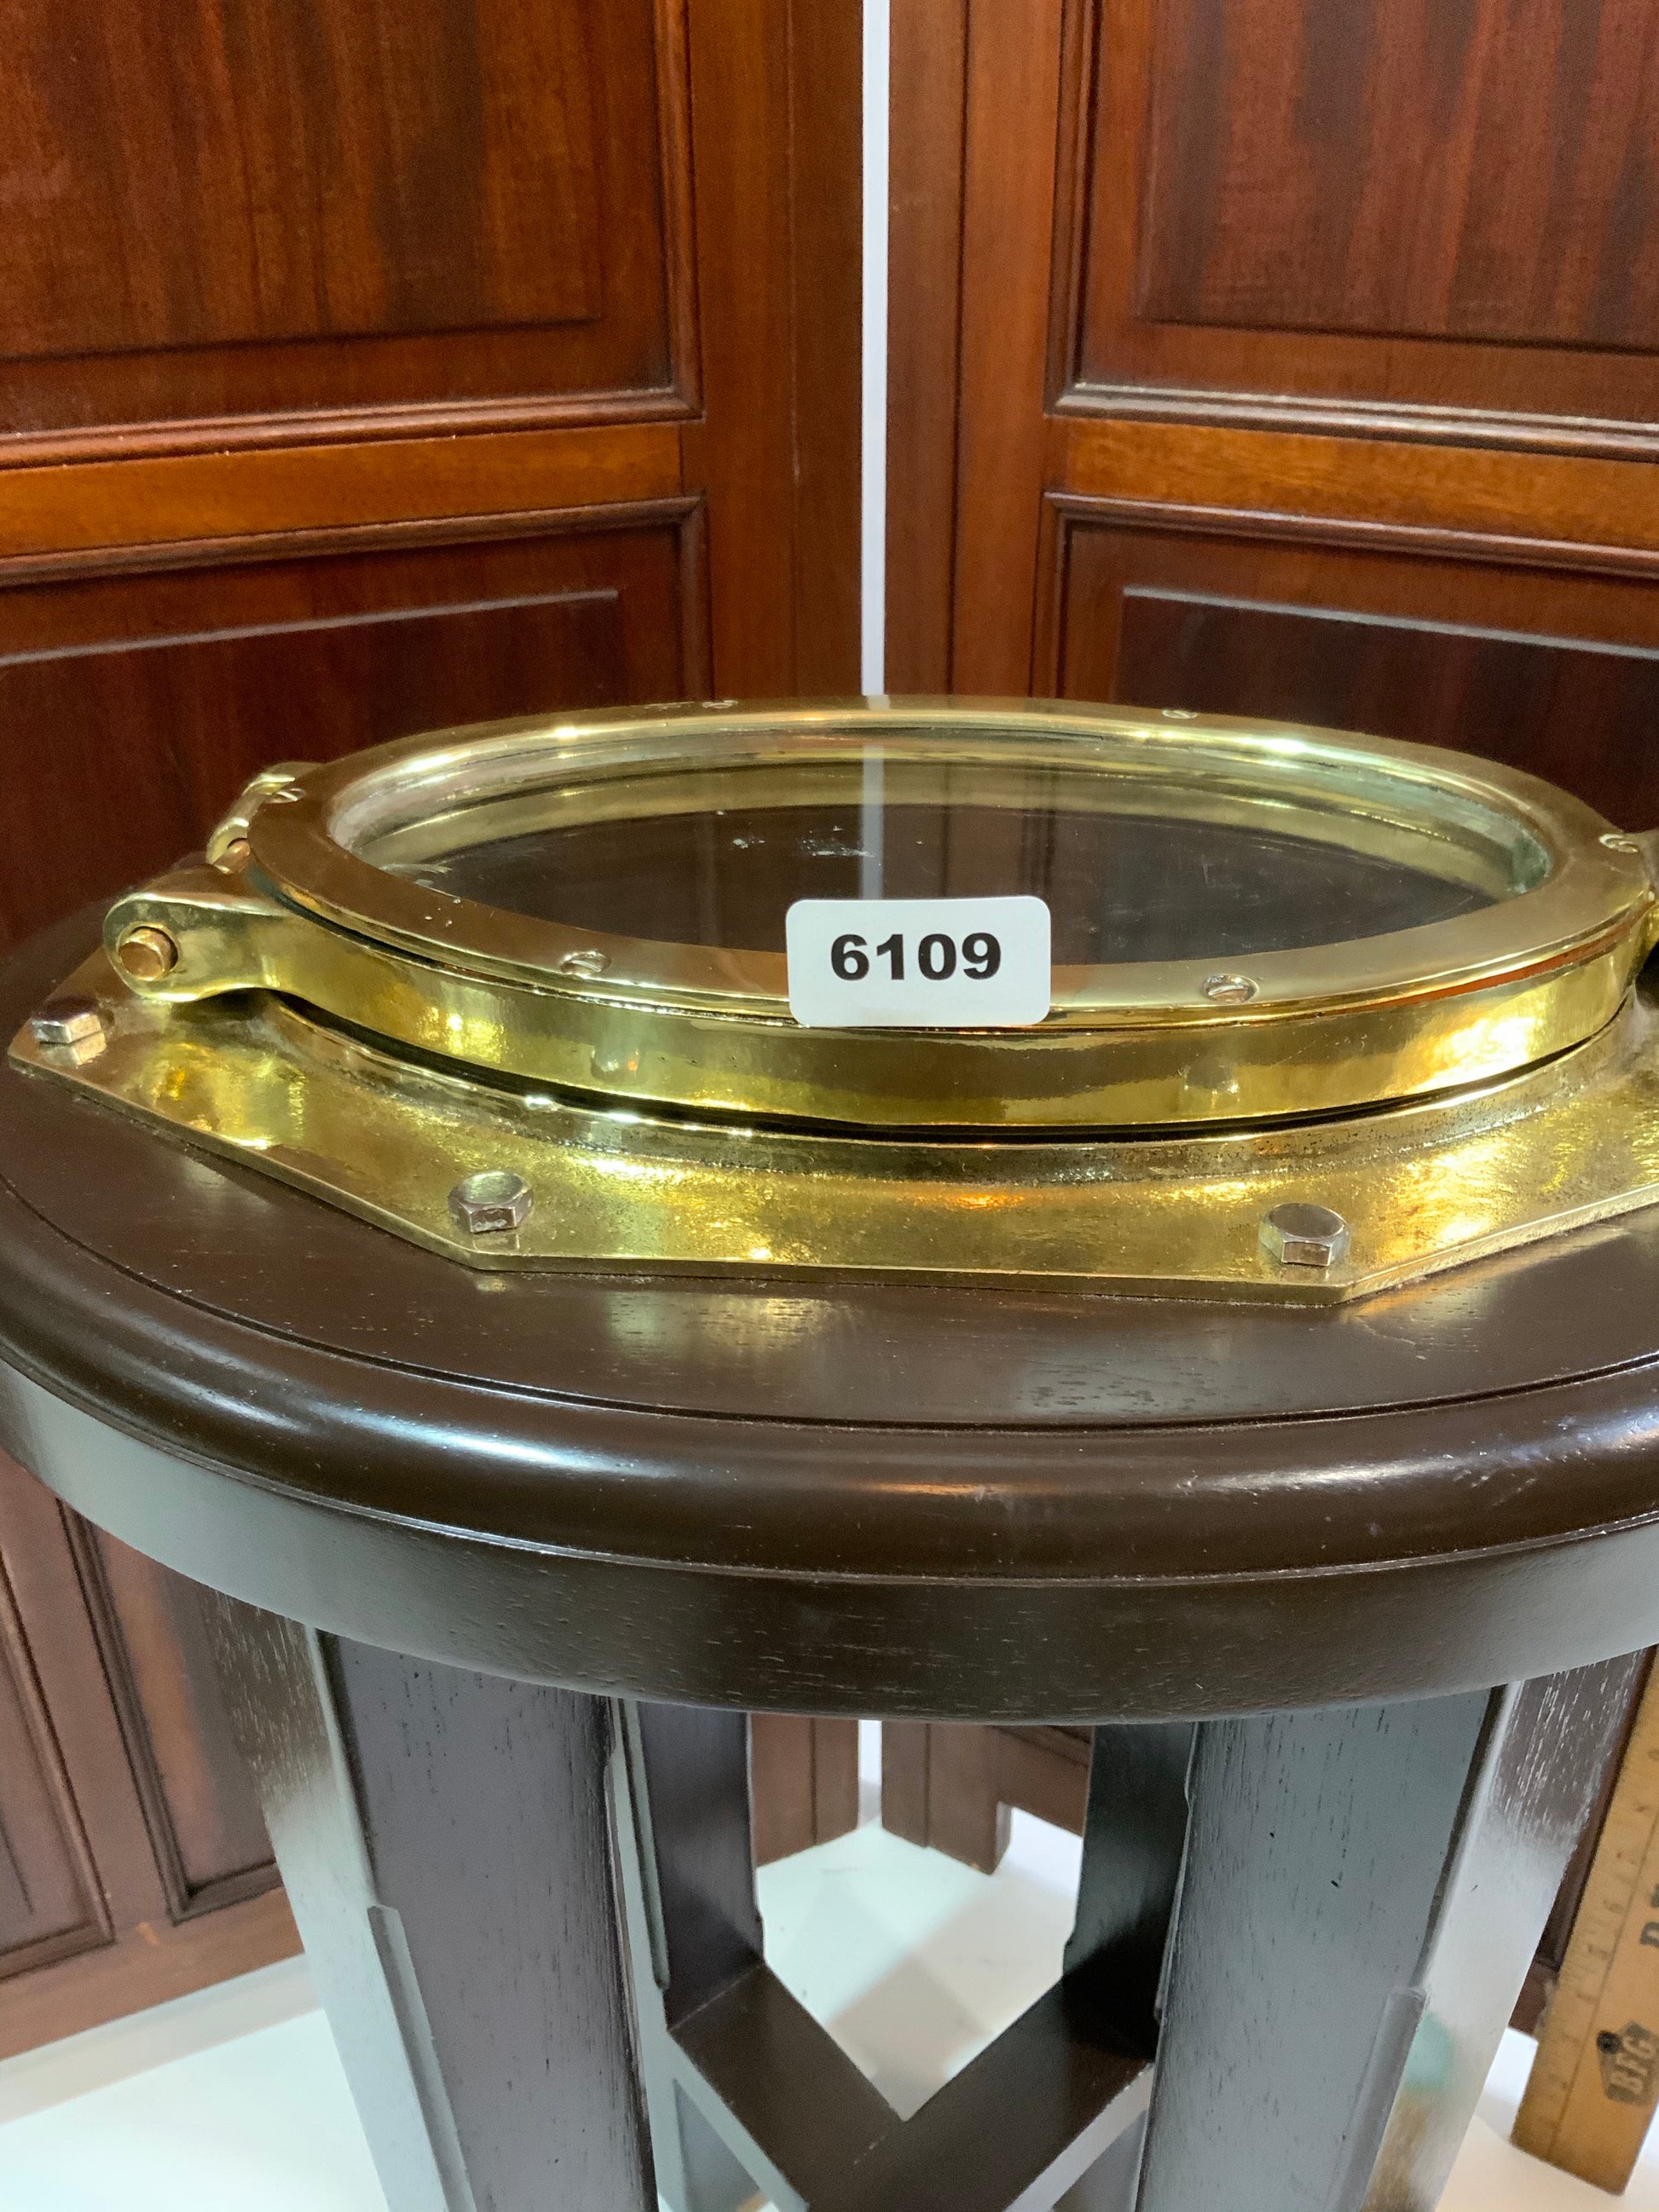 Solid Brass Ships Porthole Mounted To A Mahogany Table Base - Lannan Gallery